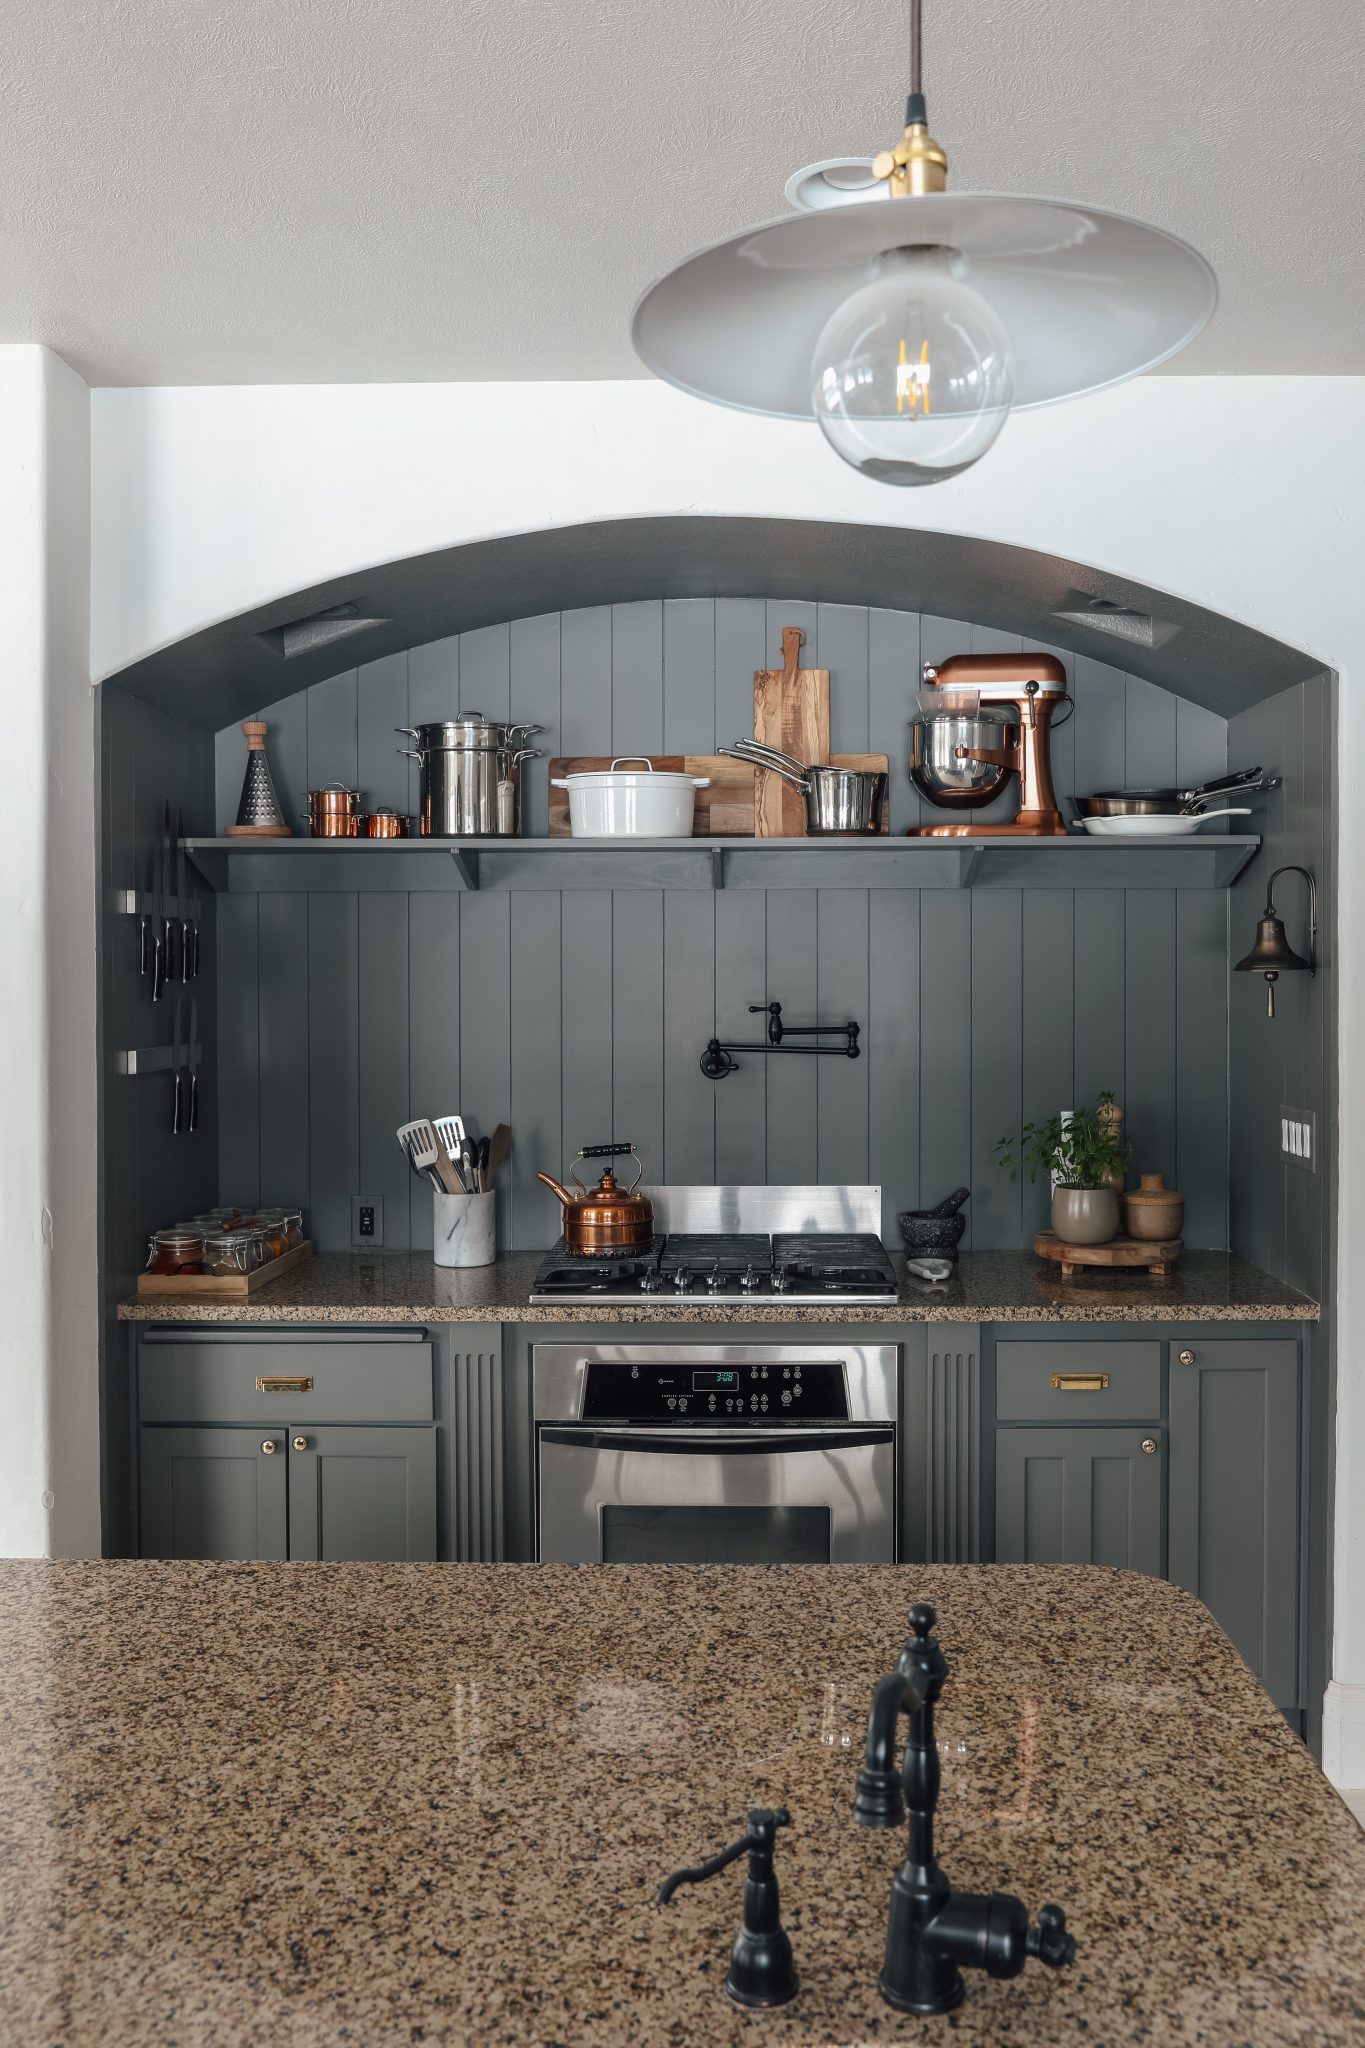 My DIY Kitchen: How I Built a Rangehood Over an Existing Cabinet - Made by  Carli